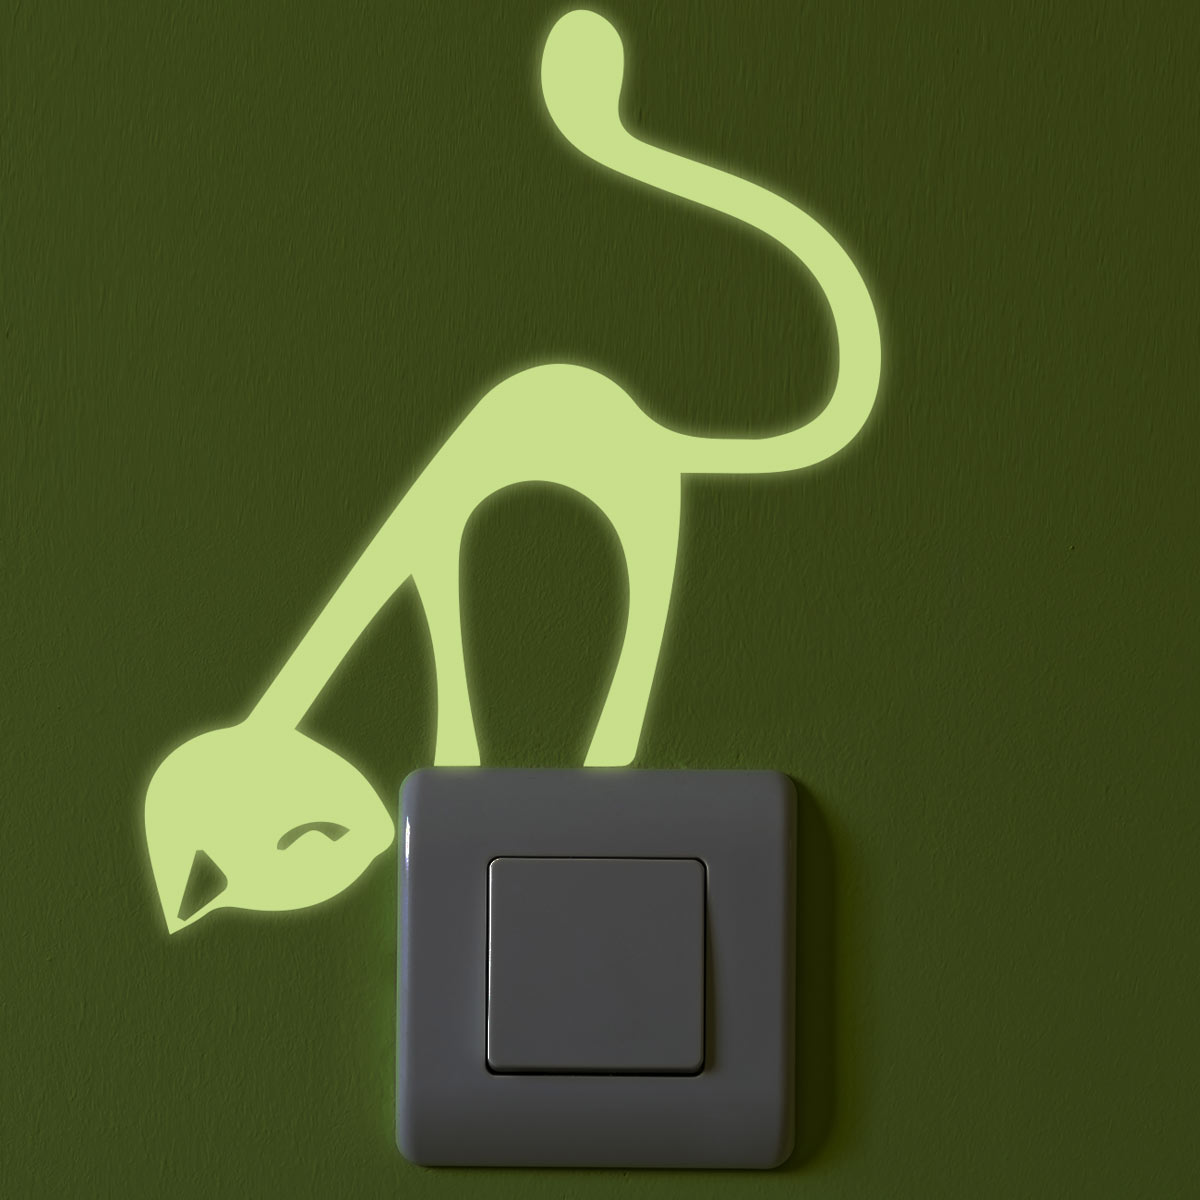 4 wall sticker for light switch glow in the dark cats